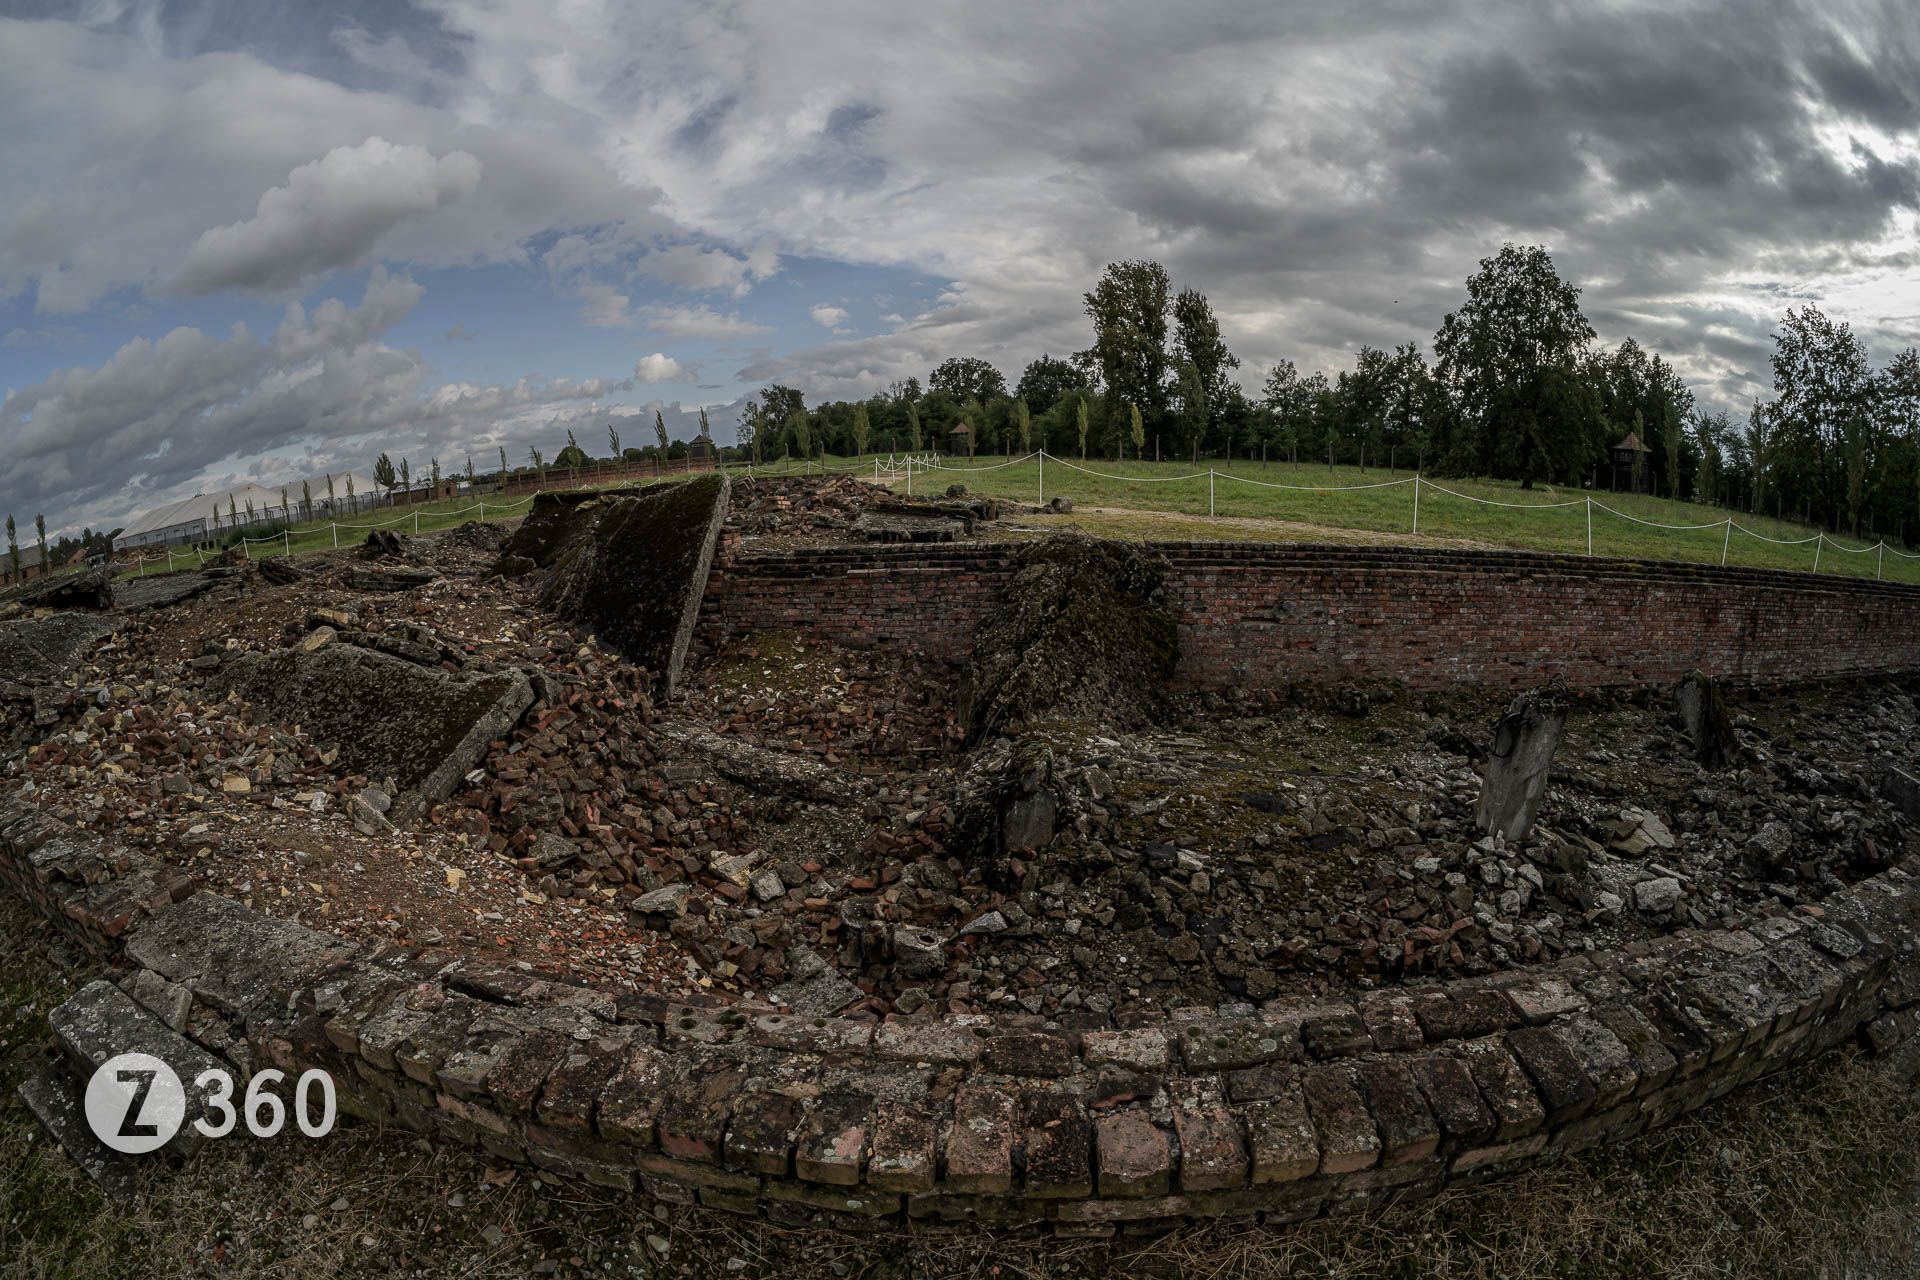 Only the foundations of the other 3 Gas Chambers remain at Birkenau